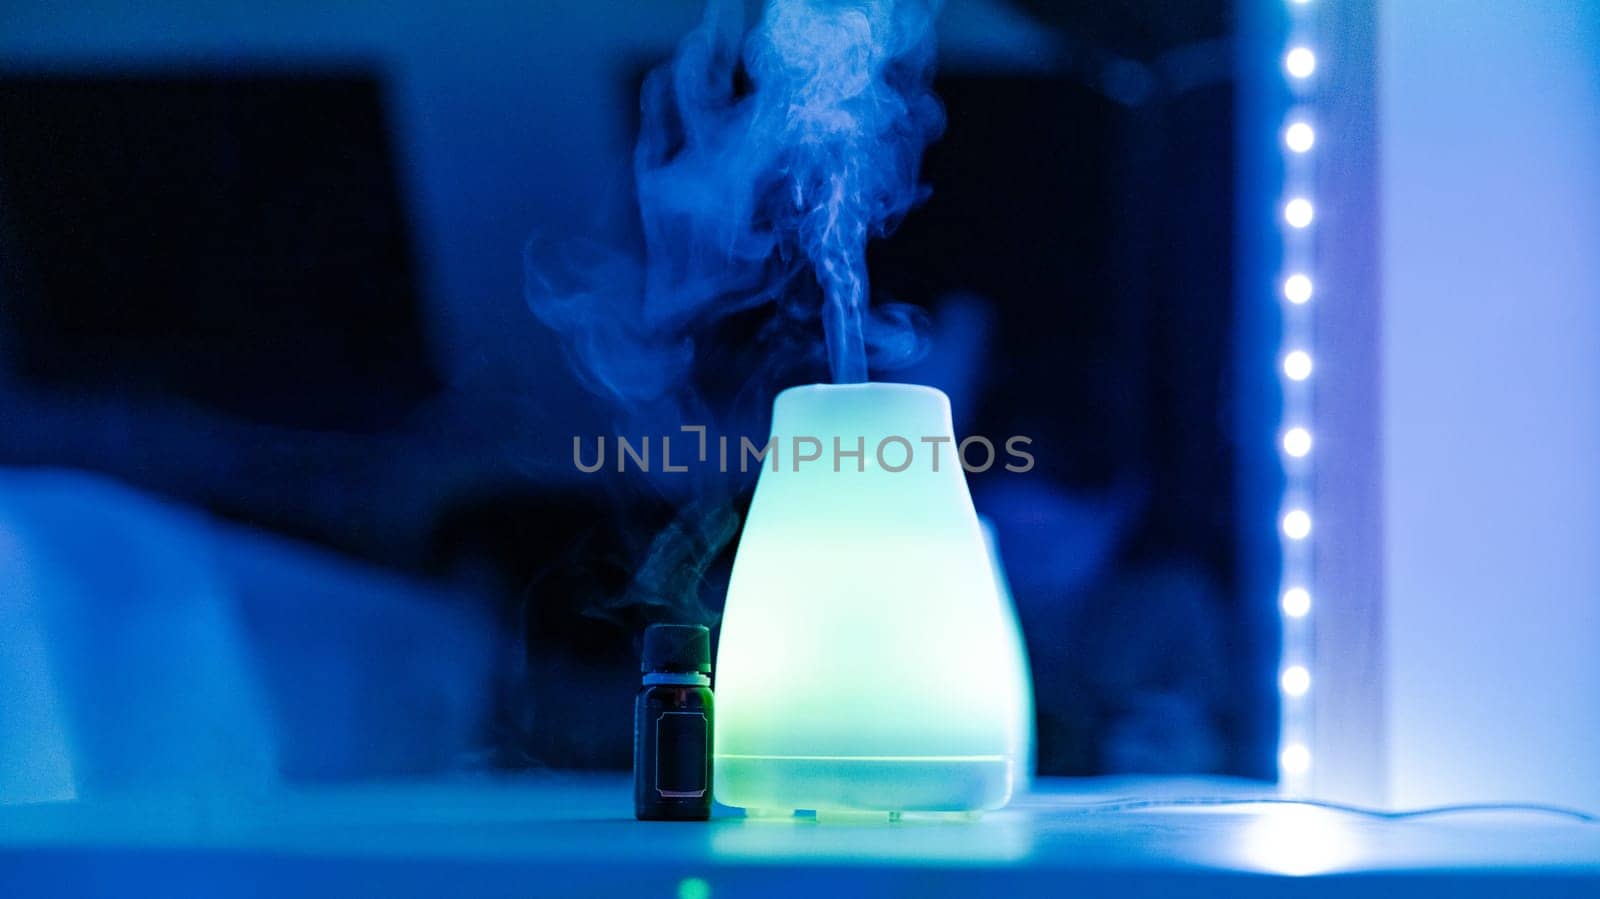 One electric air freshener with a bottle of aromatic oil lie on a table in a home beauty salon in neon light with evaporating steam, close-up side view with selective focus.